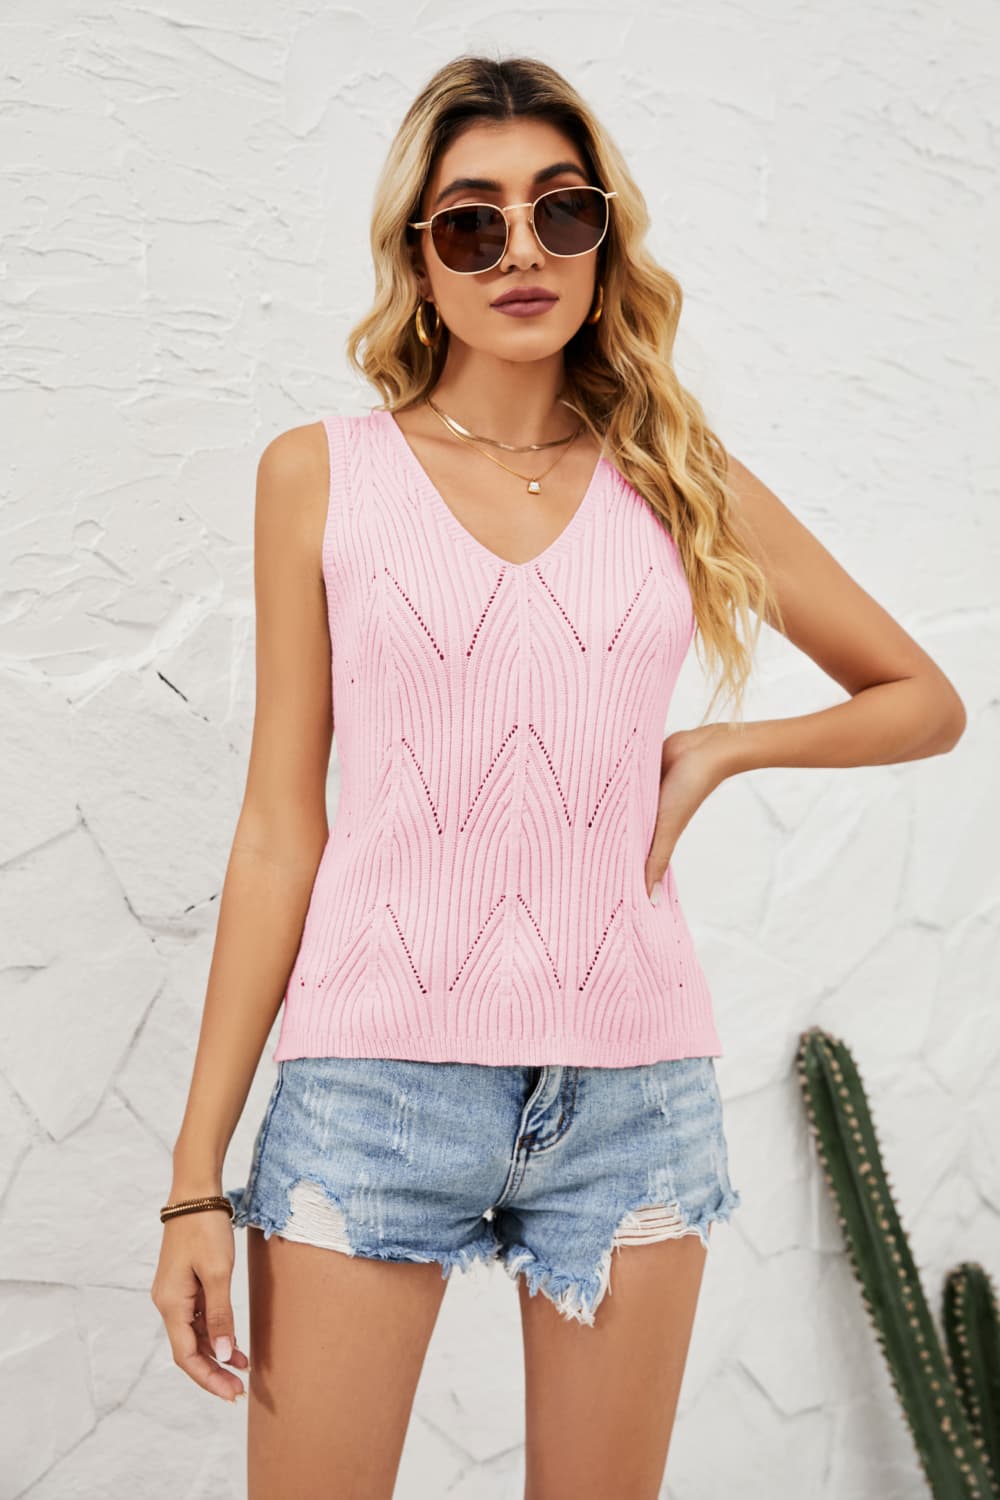 Openwork V-Neck Knit Top Print on any thing USA/STOD clothes